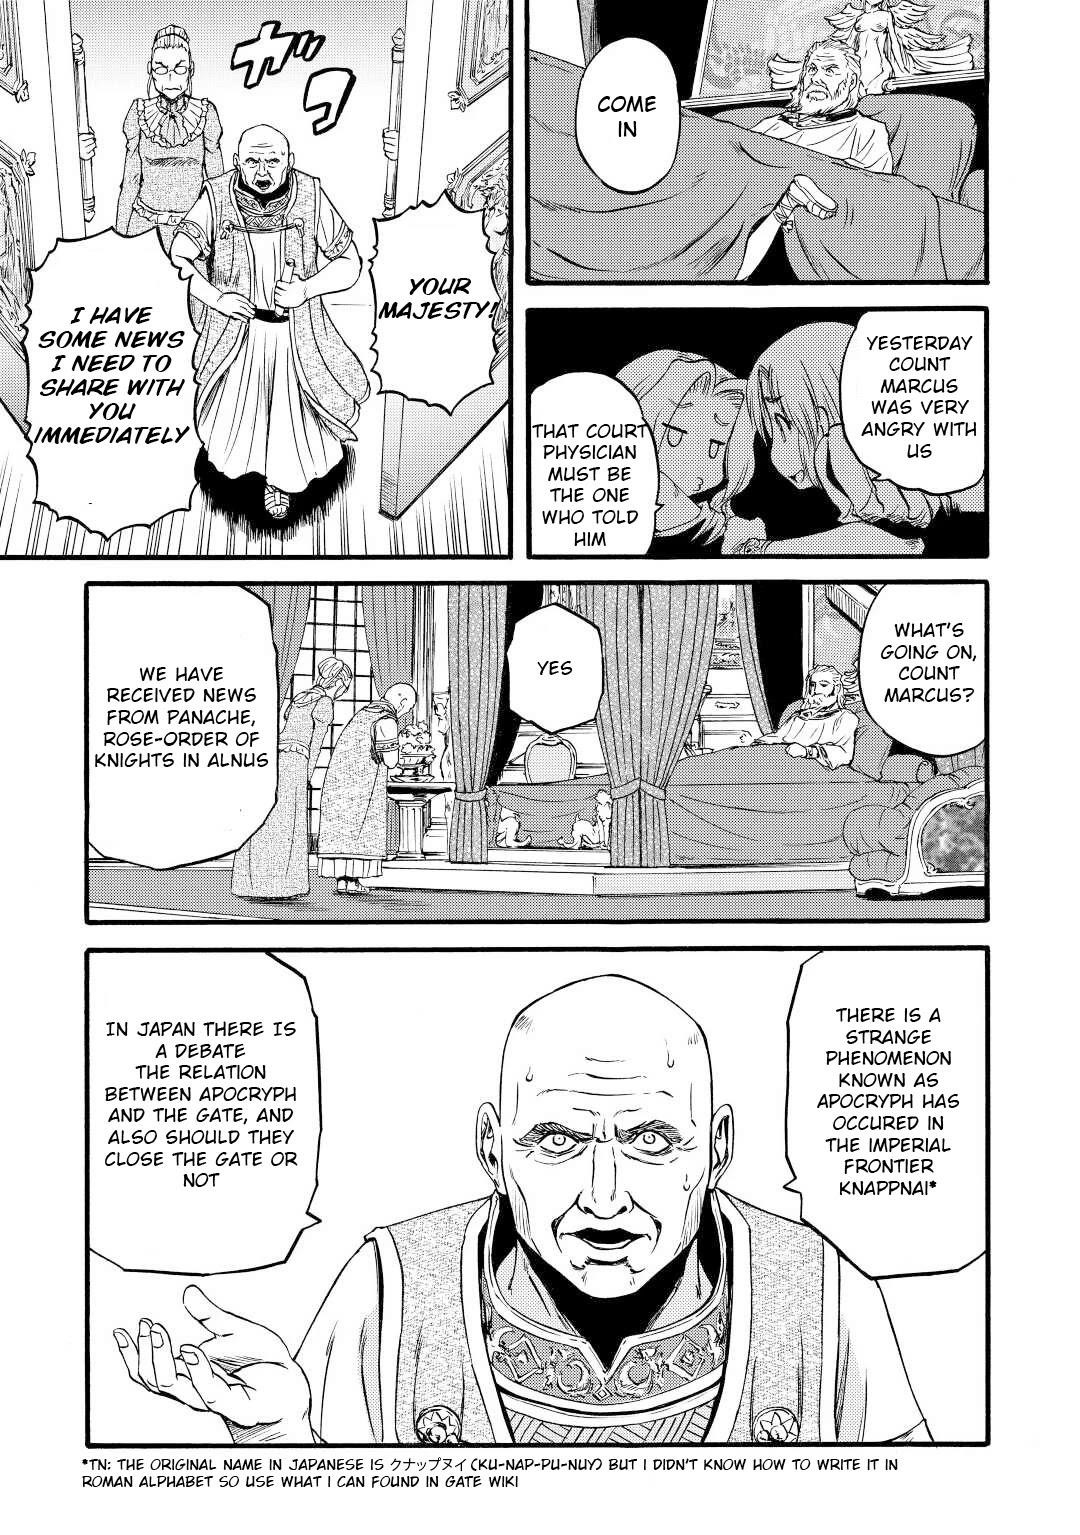 Chapter 72, Gate - Thus the JSDF Fought There! Wiki